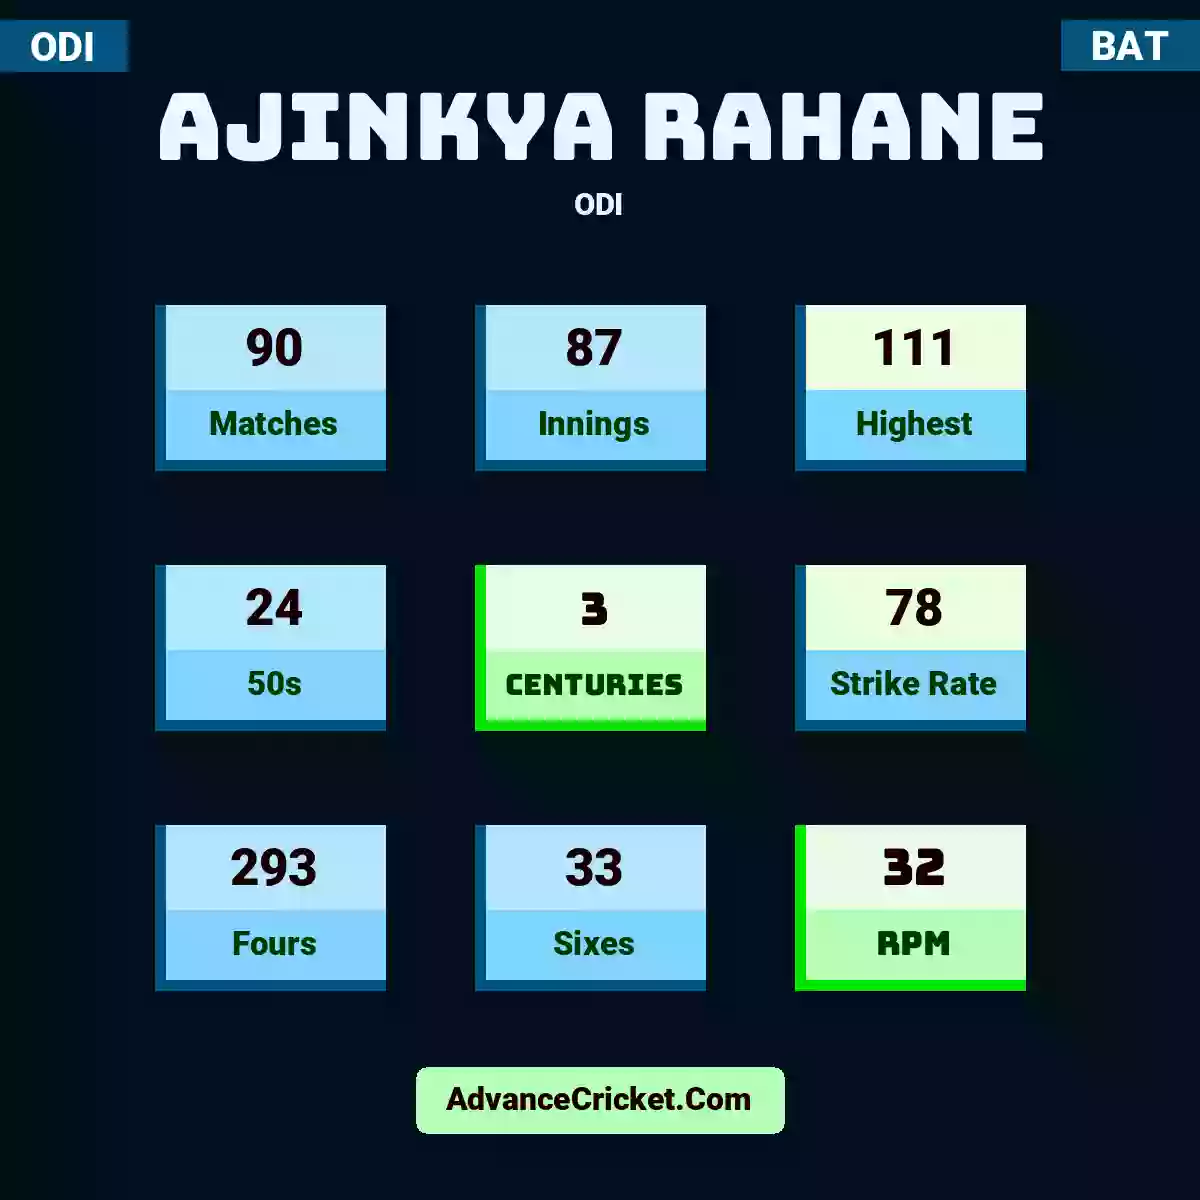 Ajinkya Rahane ODI , Ajinkya Rahane played 90 matches, scored 111 runs as highest, 24 half-centuries, and 3 centuries, with a strike rate of 78. A.Rahane hit 293 fours and 33 sixes, with an RPM of 32.